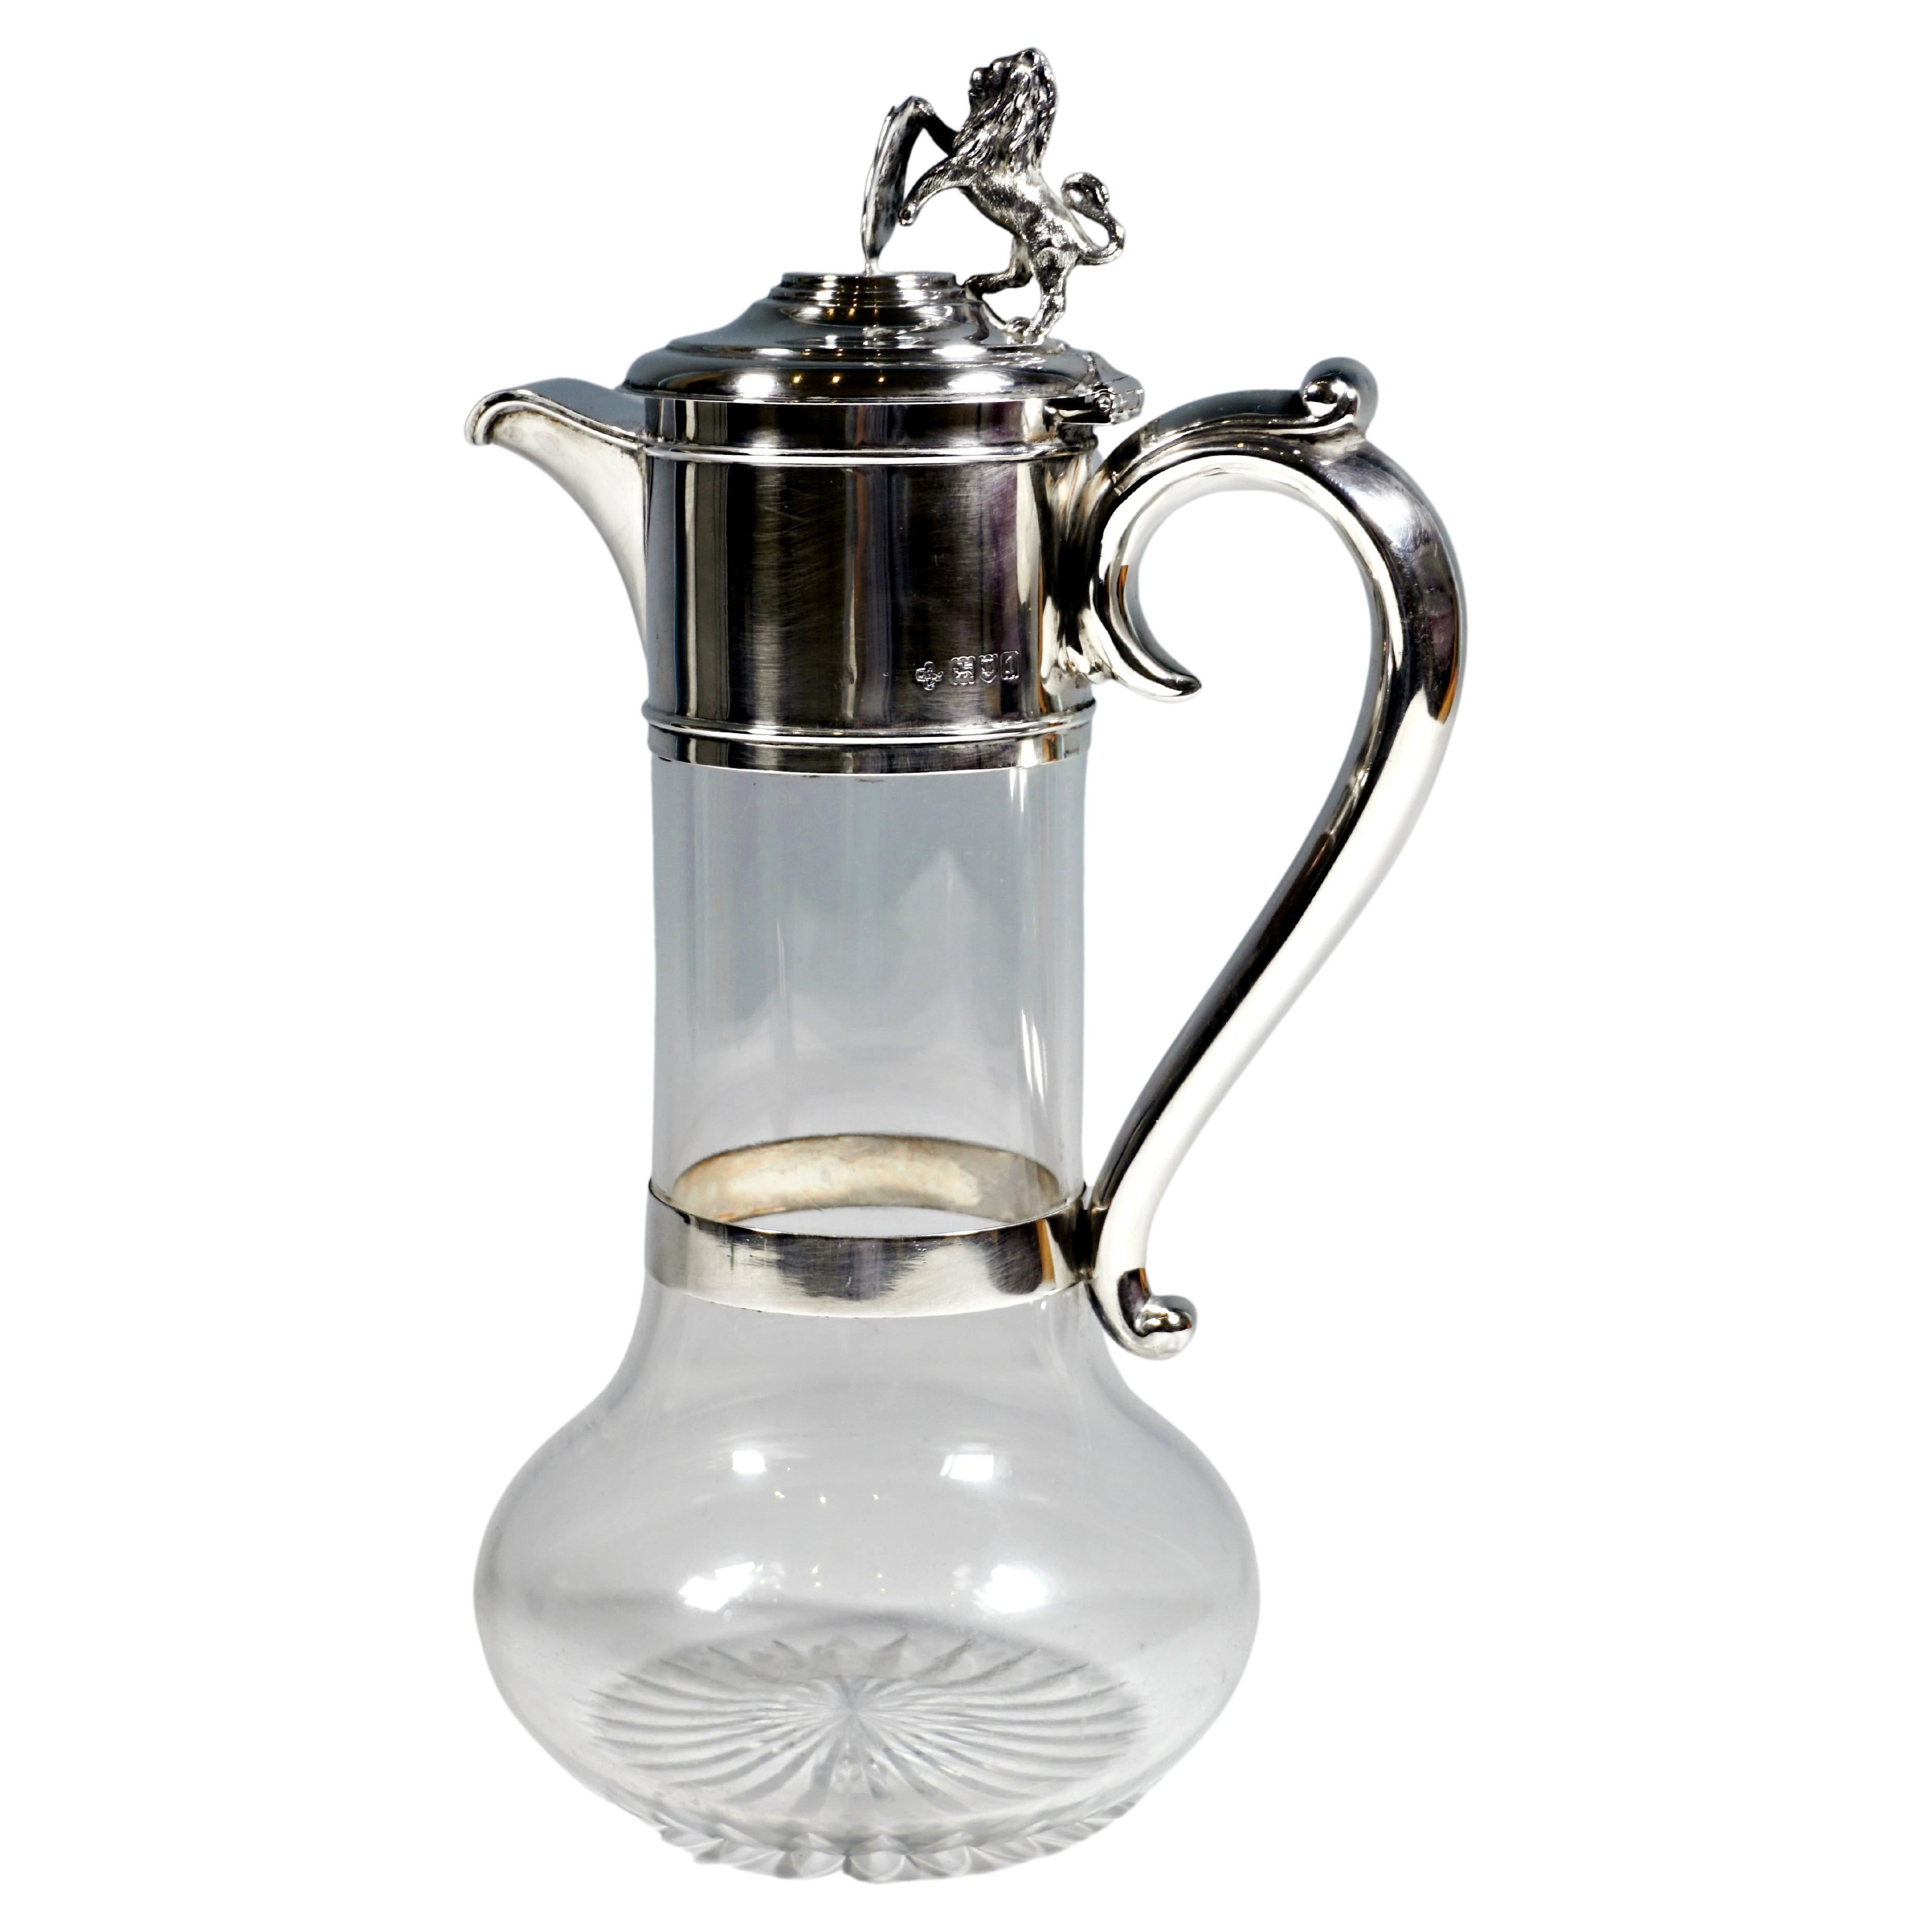 Glass Carafe With Lion & Coat Of Arms Silver Fitting, London, Early 20th Century